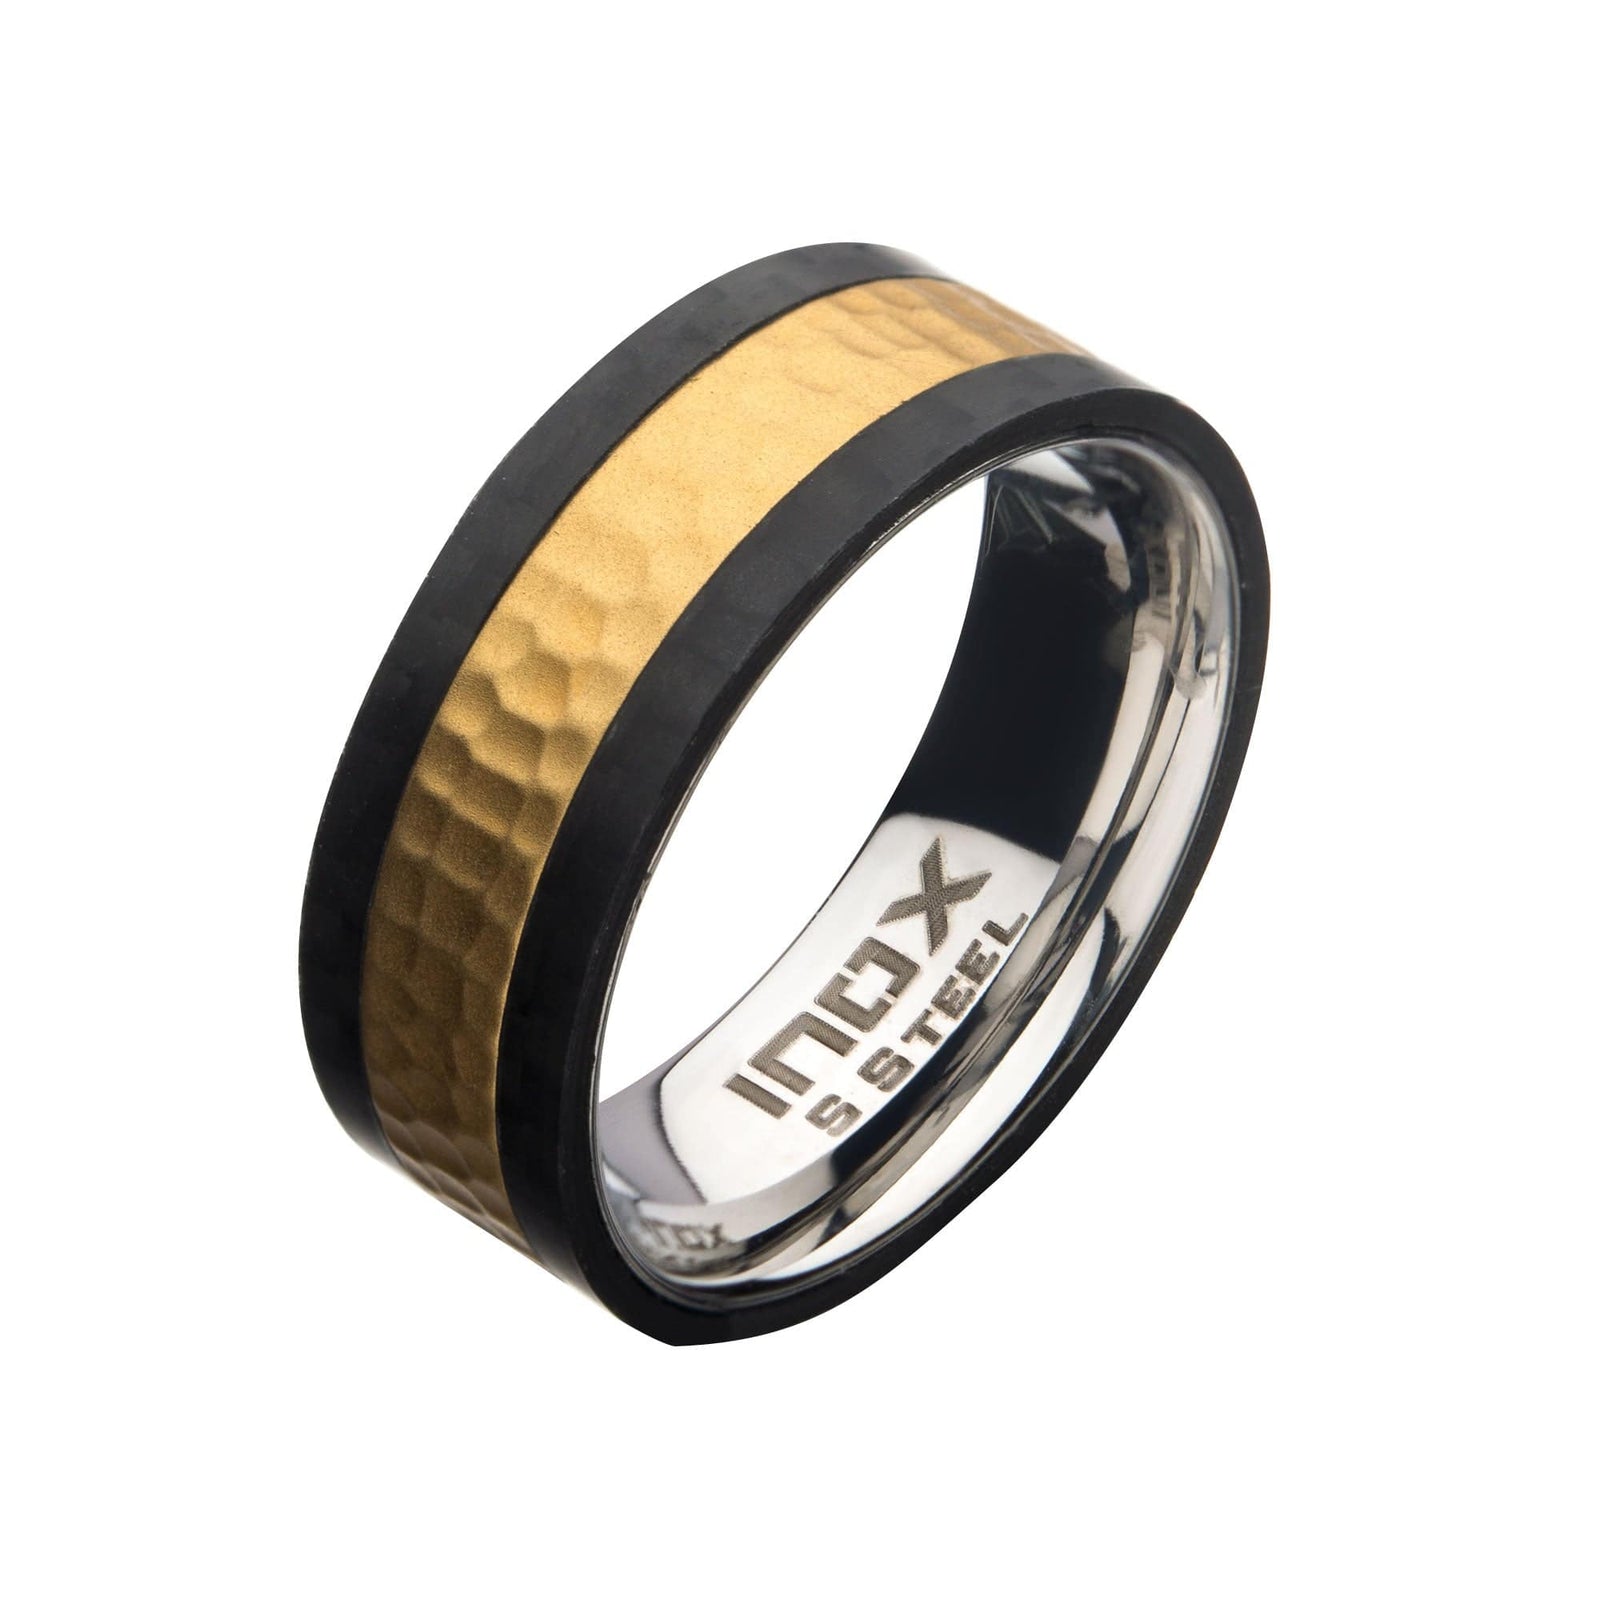 INOX JEWELRY Rings Golden Tone, Black and Silver Tone Stainless Steel Carbon Fiber Hammered Band Ring